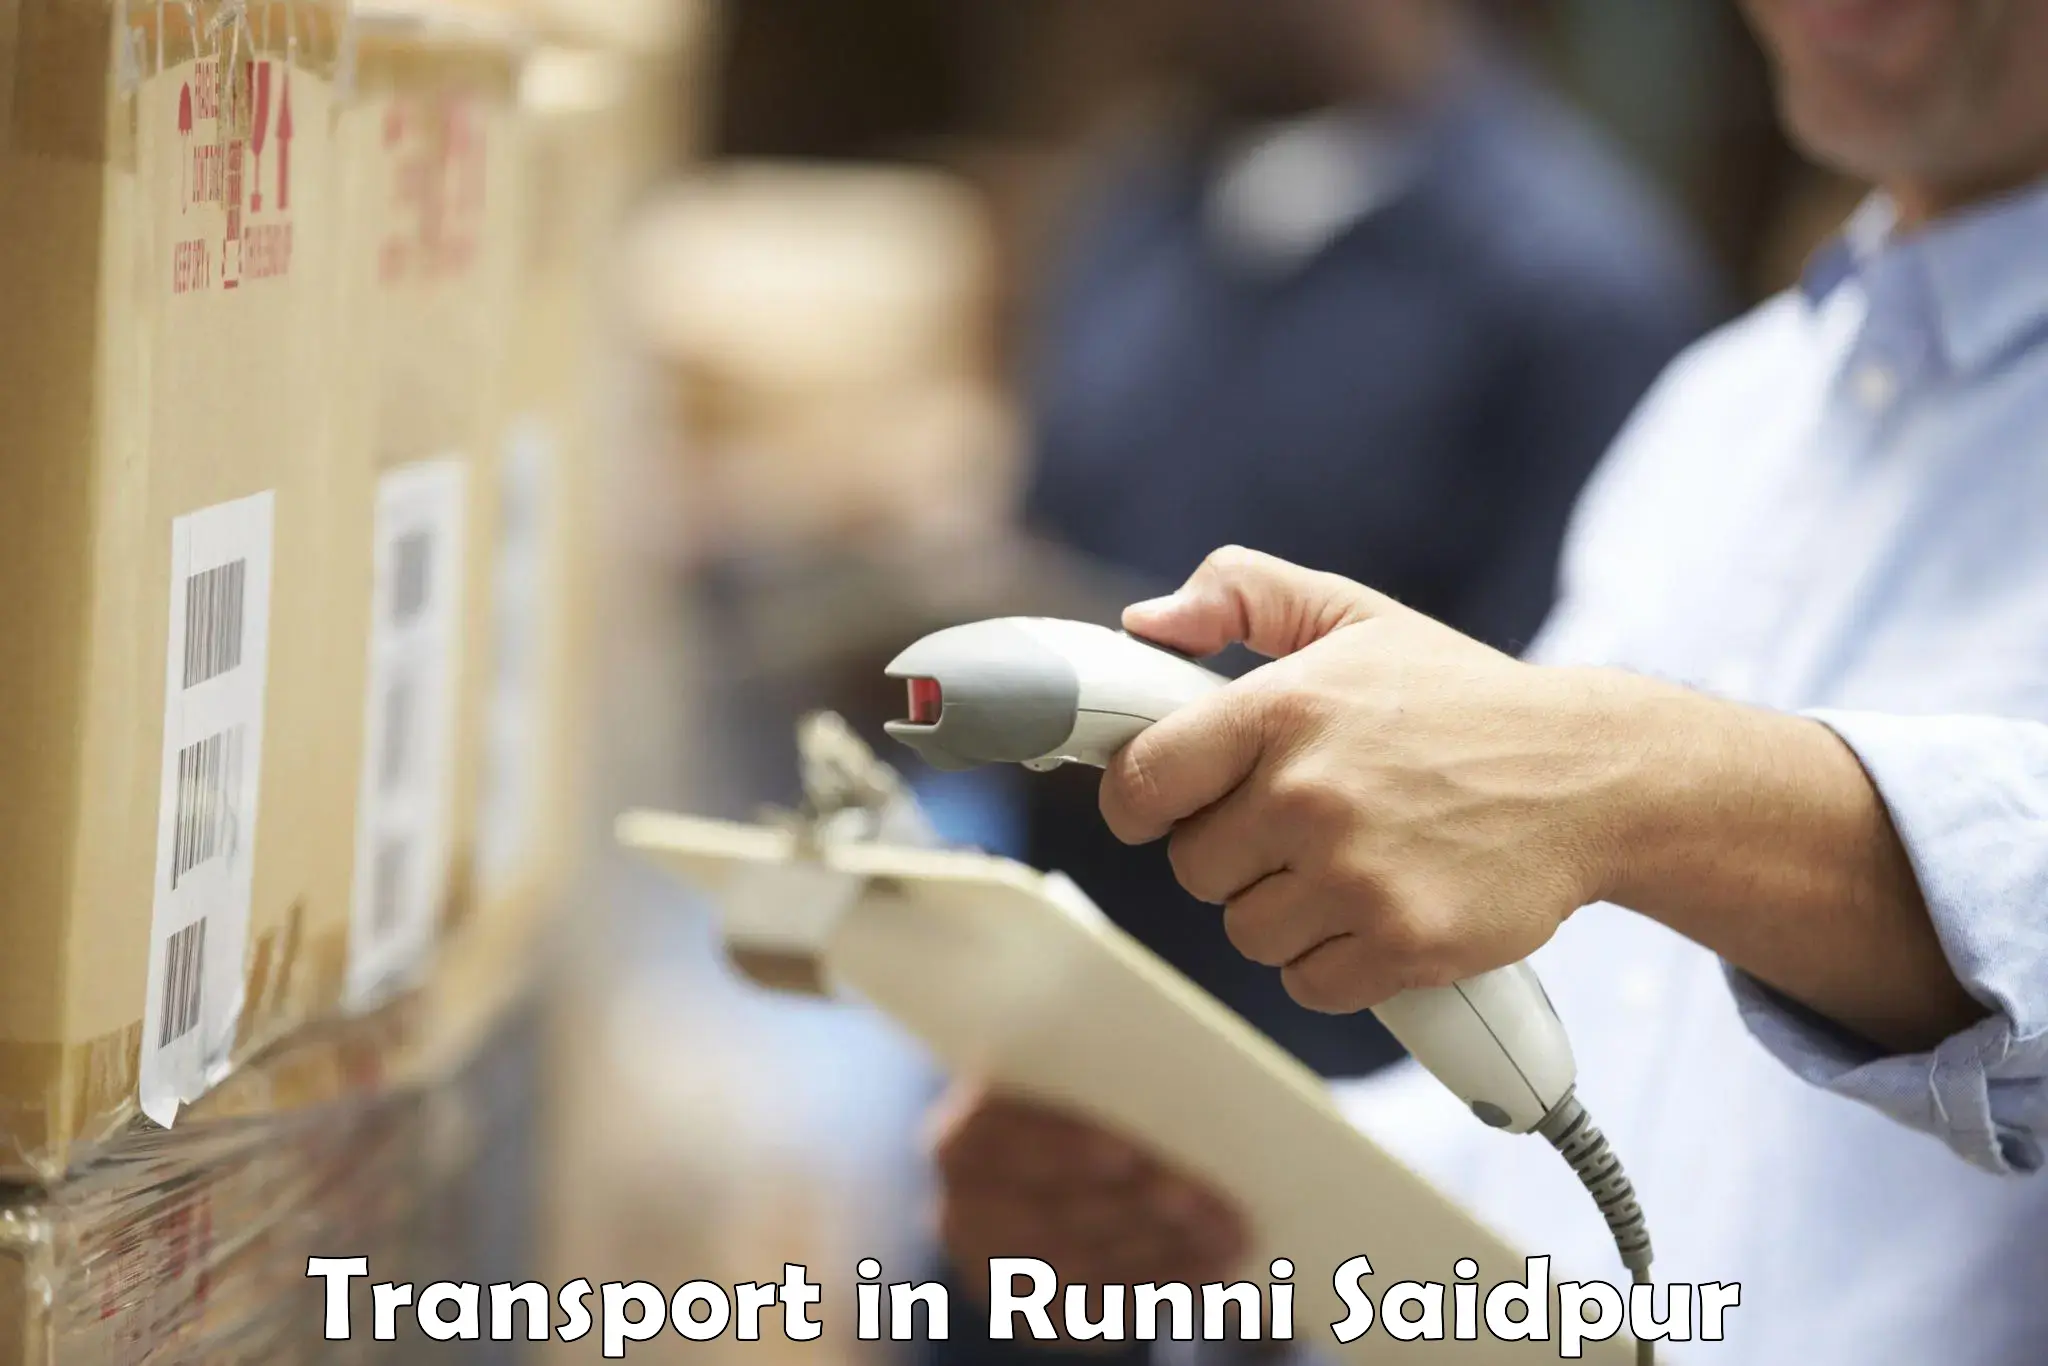 Air freight transport services in Runni Saidpur